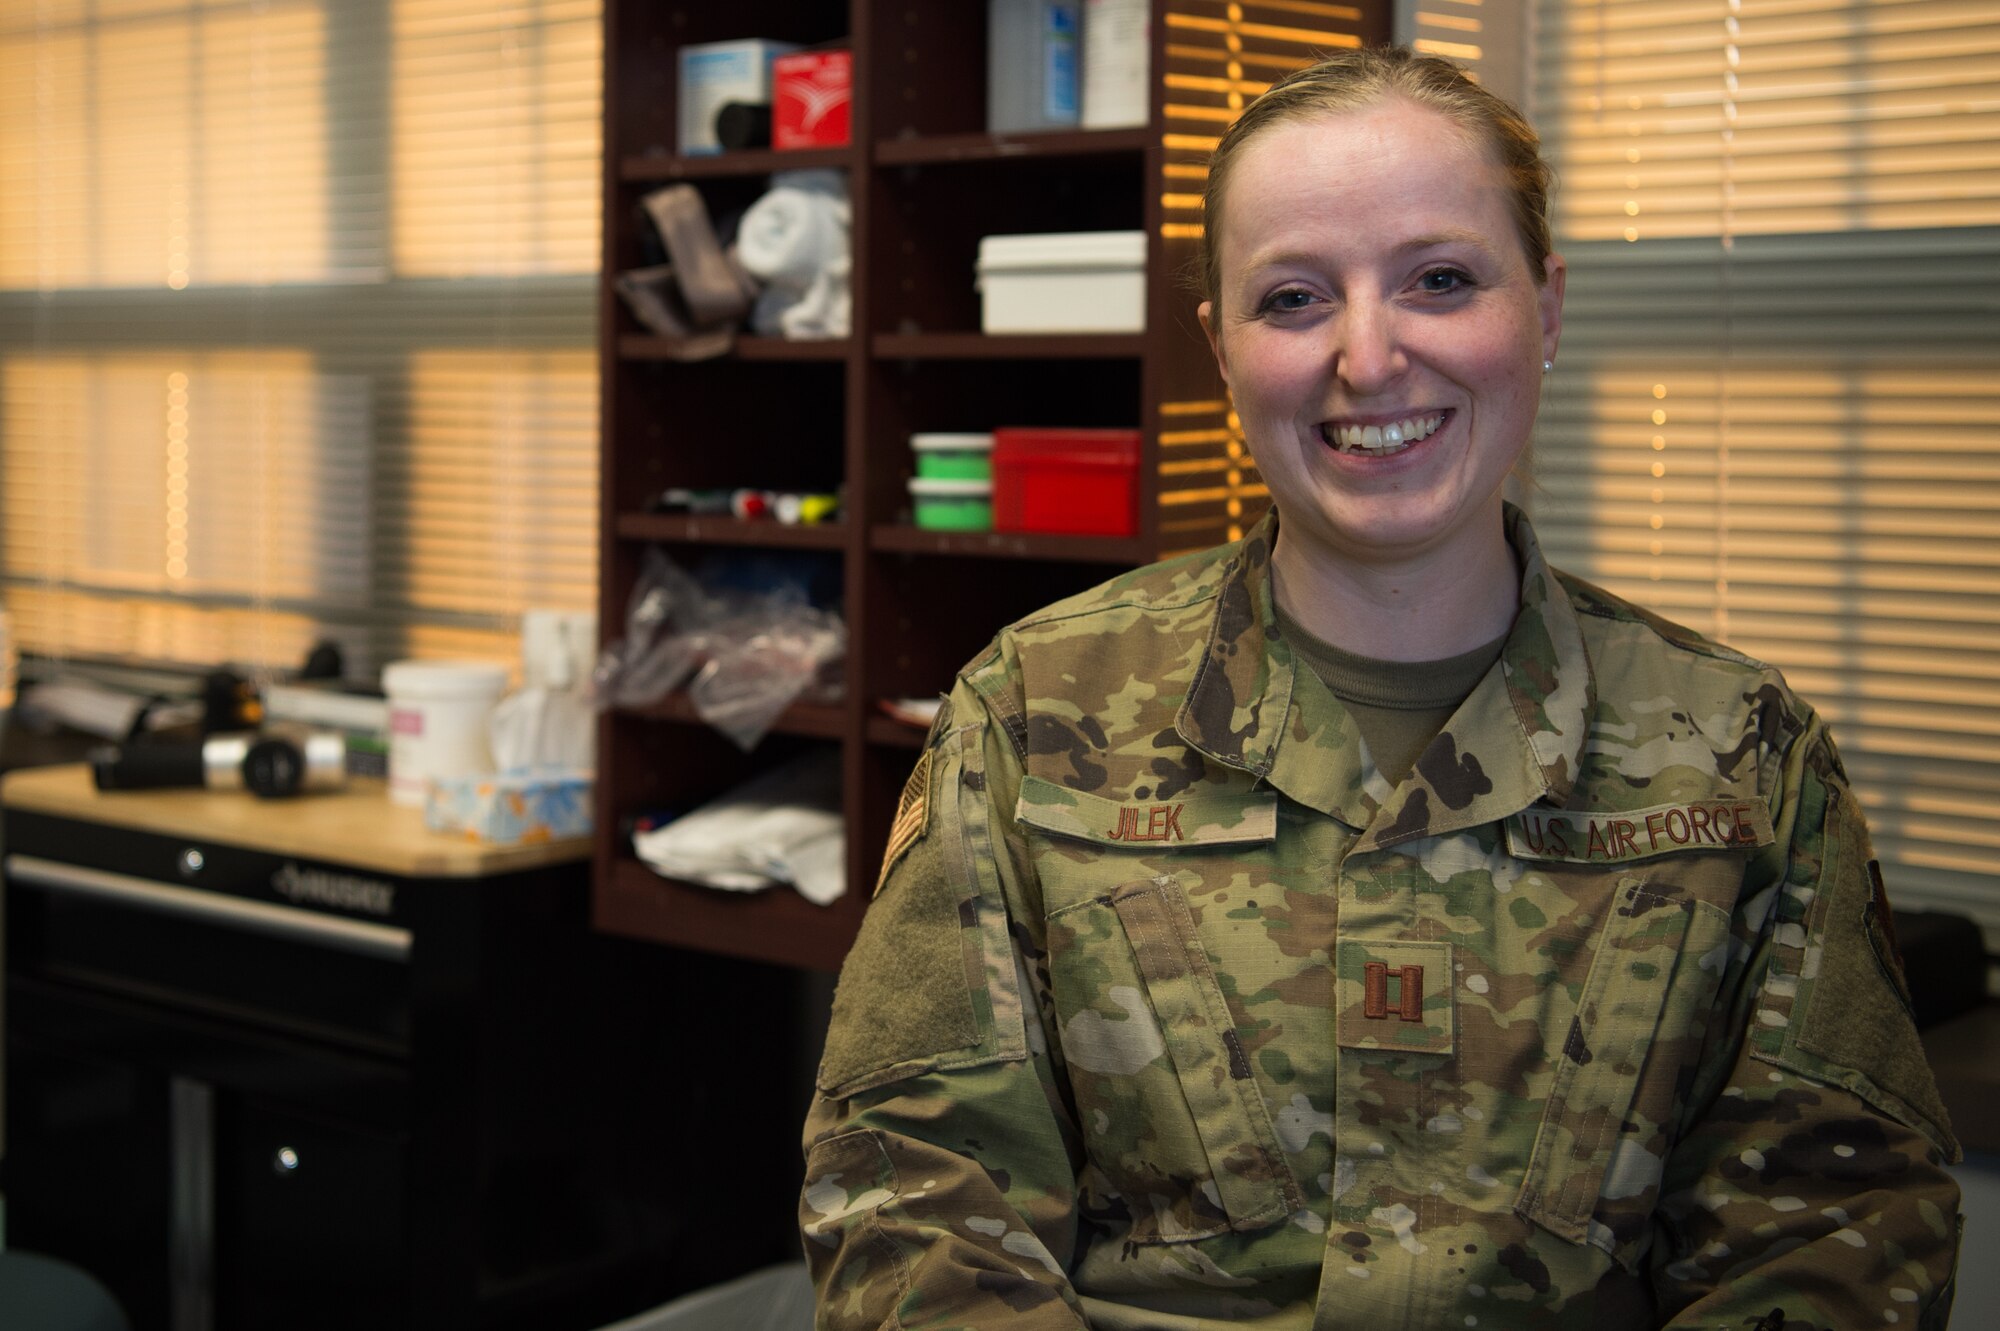 U.S. Air Force Capt. Michelle Jilek, is a physical therapist assigned to the 633rd Medical Operations Squadron, but has been embedded part time with the 1st Fighter Wing to help increase mission effectiveness.